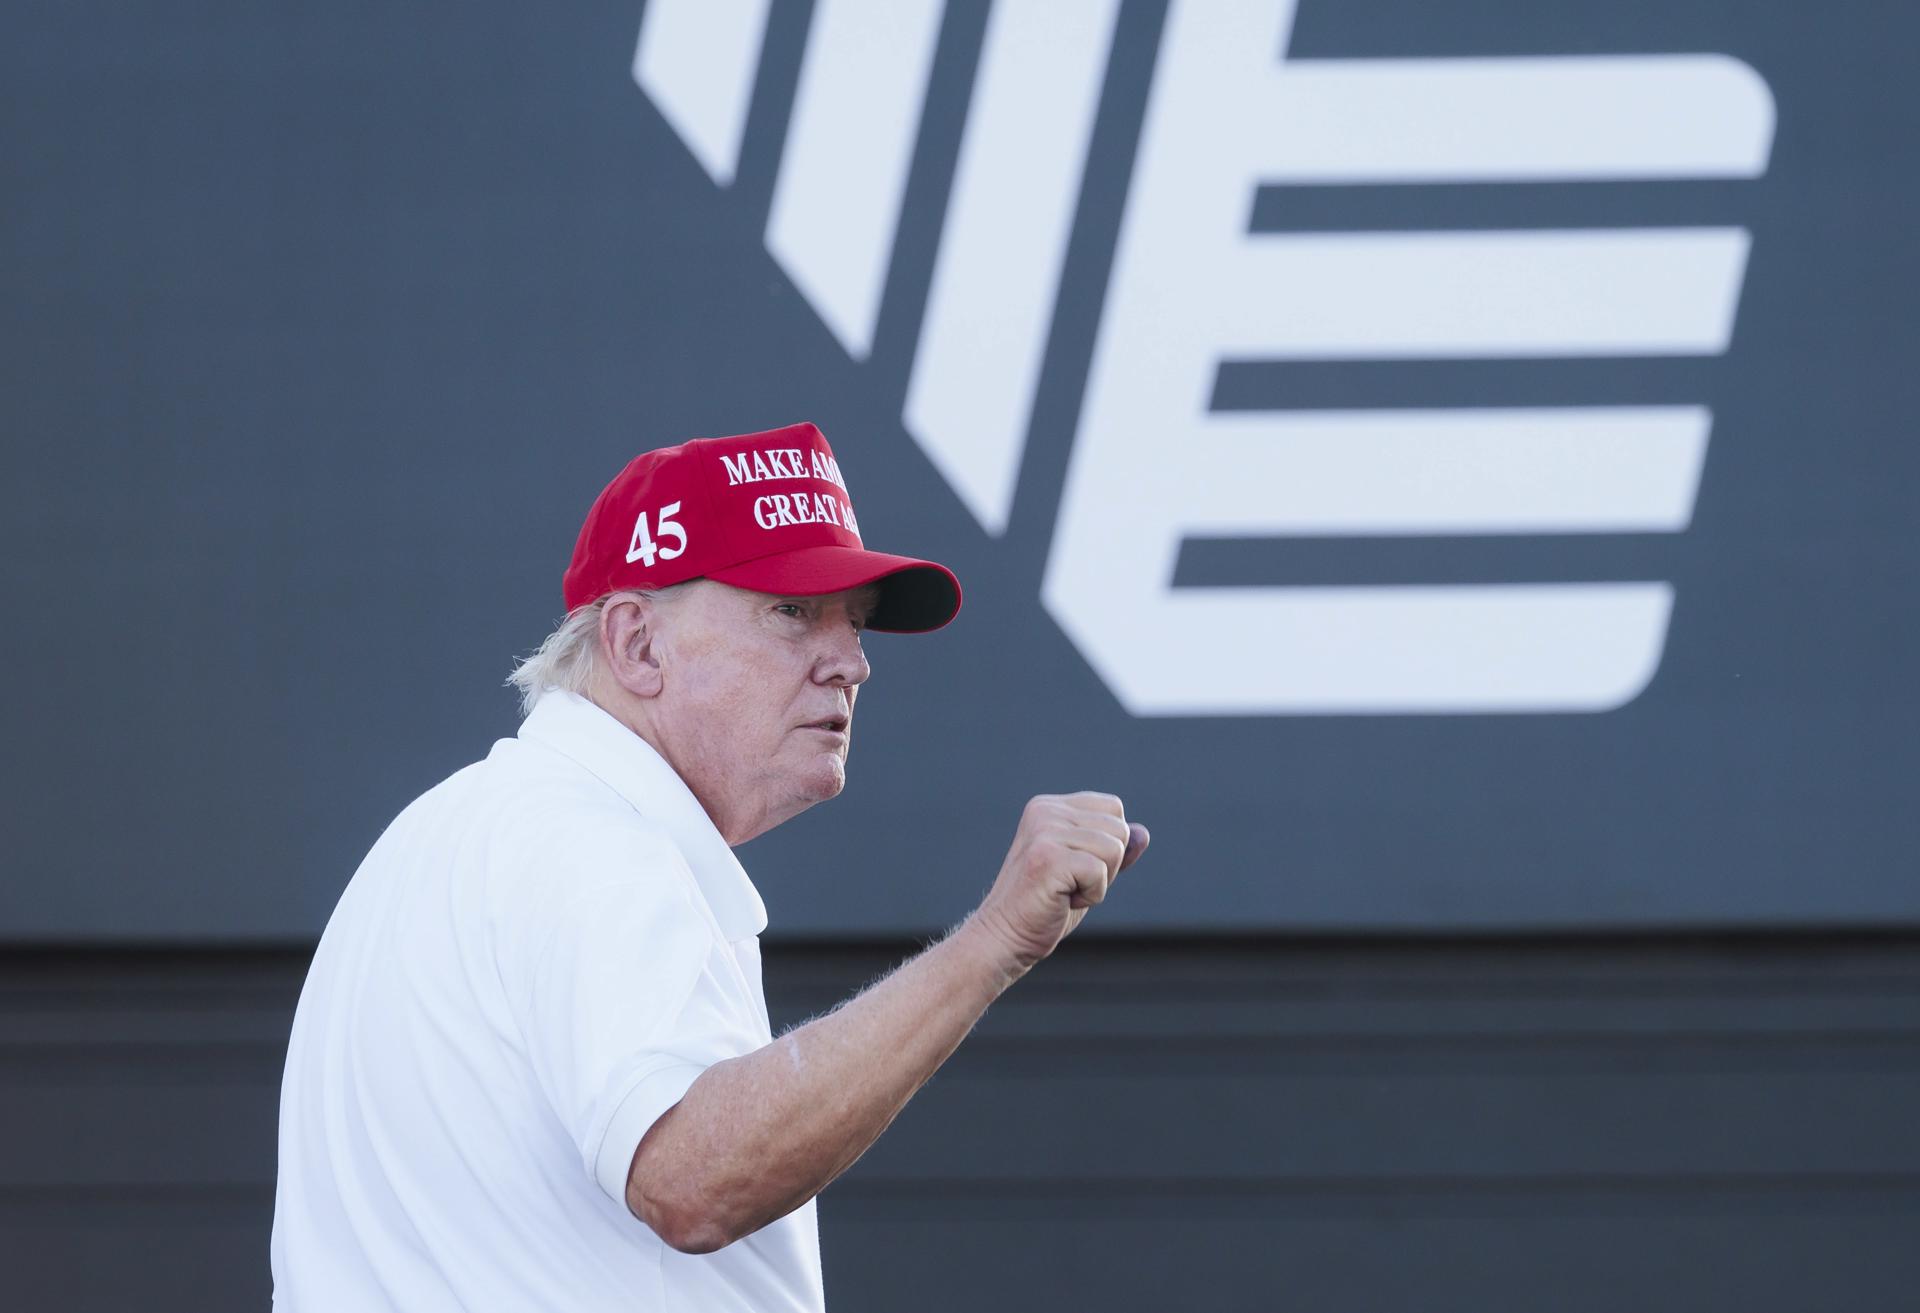 Former US President Donald J. Trump acknowledges fans during the third round of the LIV Golf tournament at Trump National Golf Club Bedminster in Bedminster, New Jersey, US, 13 August 2023. EFE-EPA/JUSTIN LANE